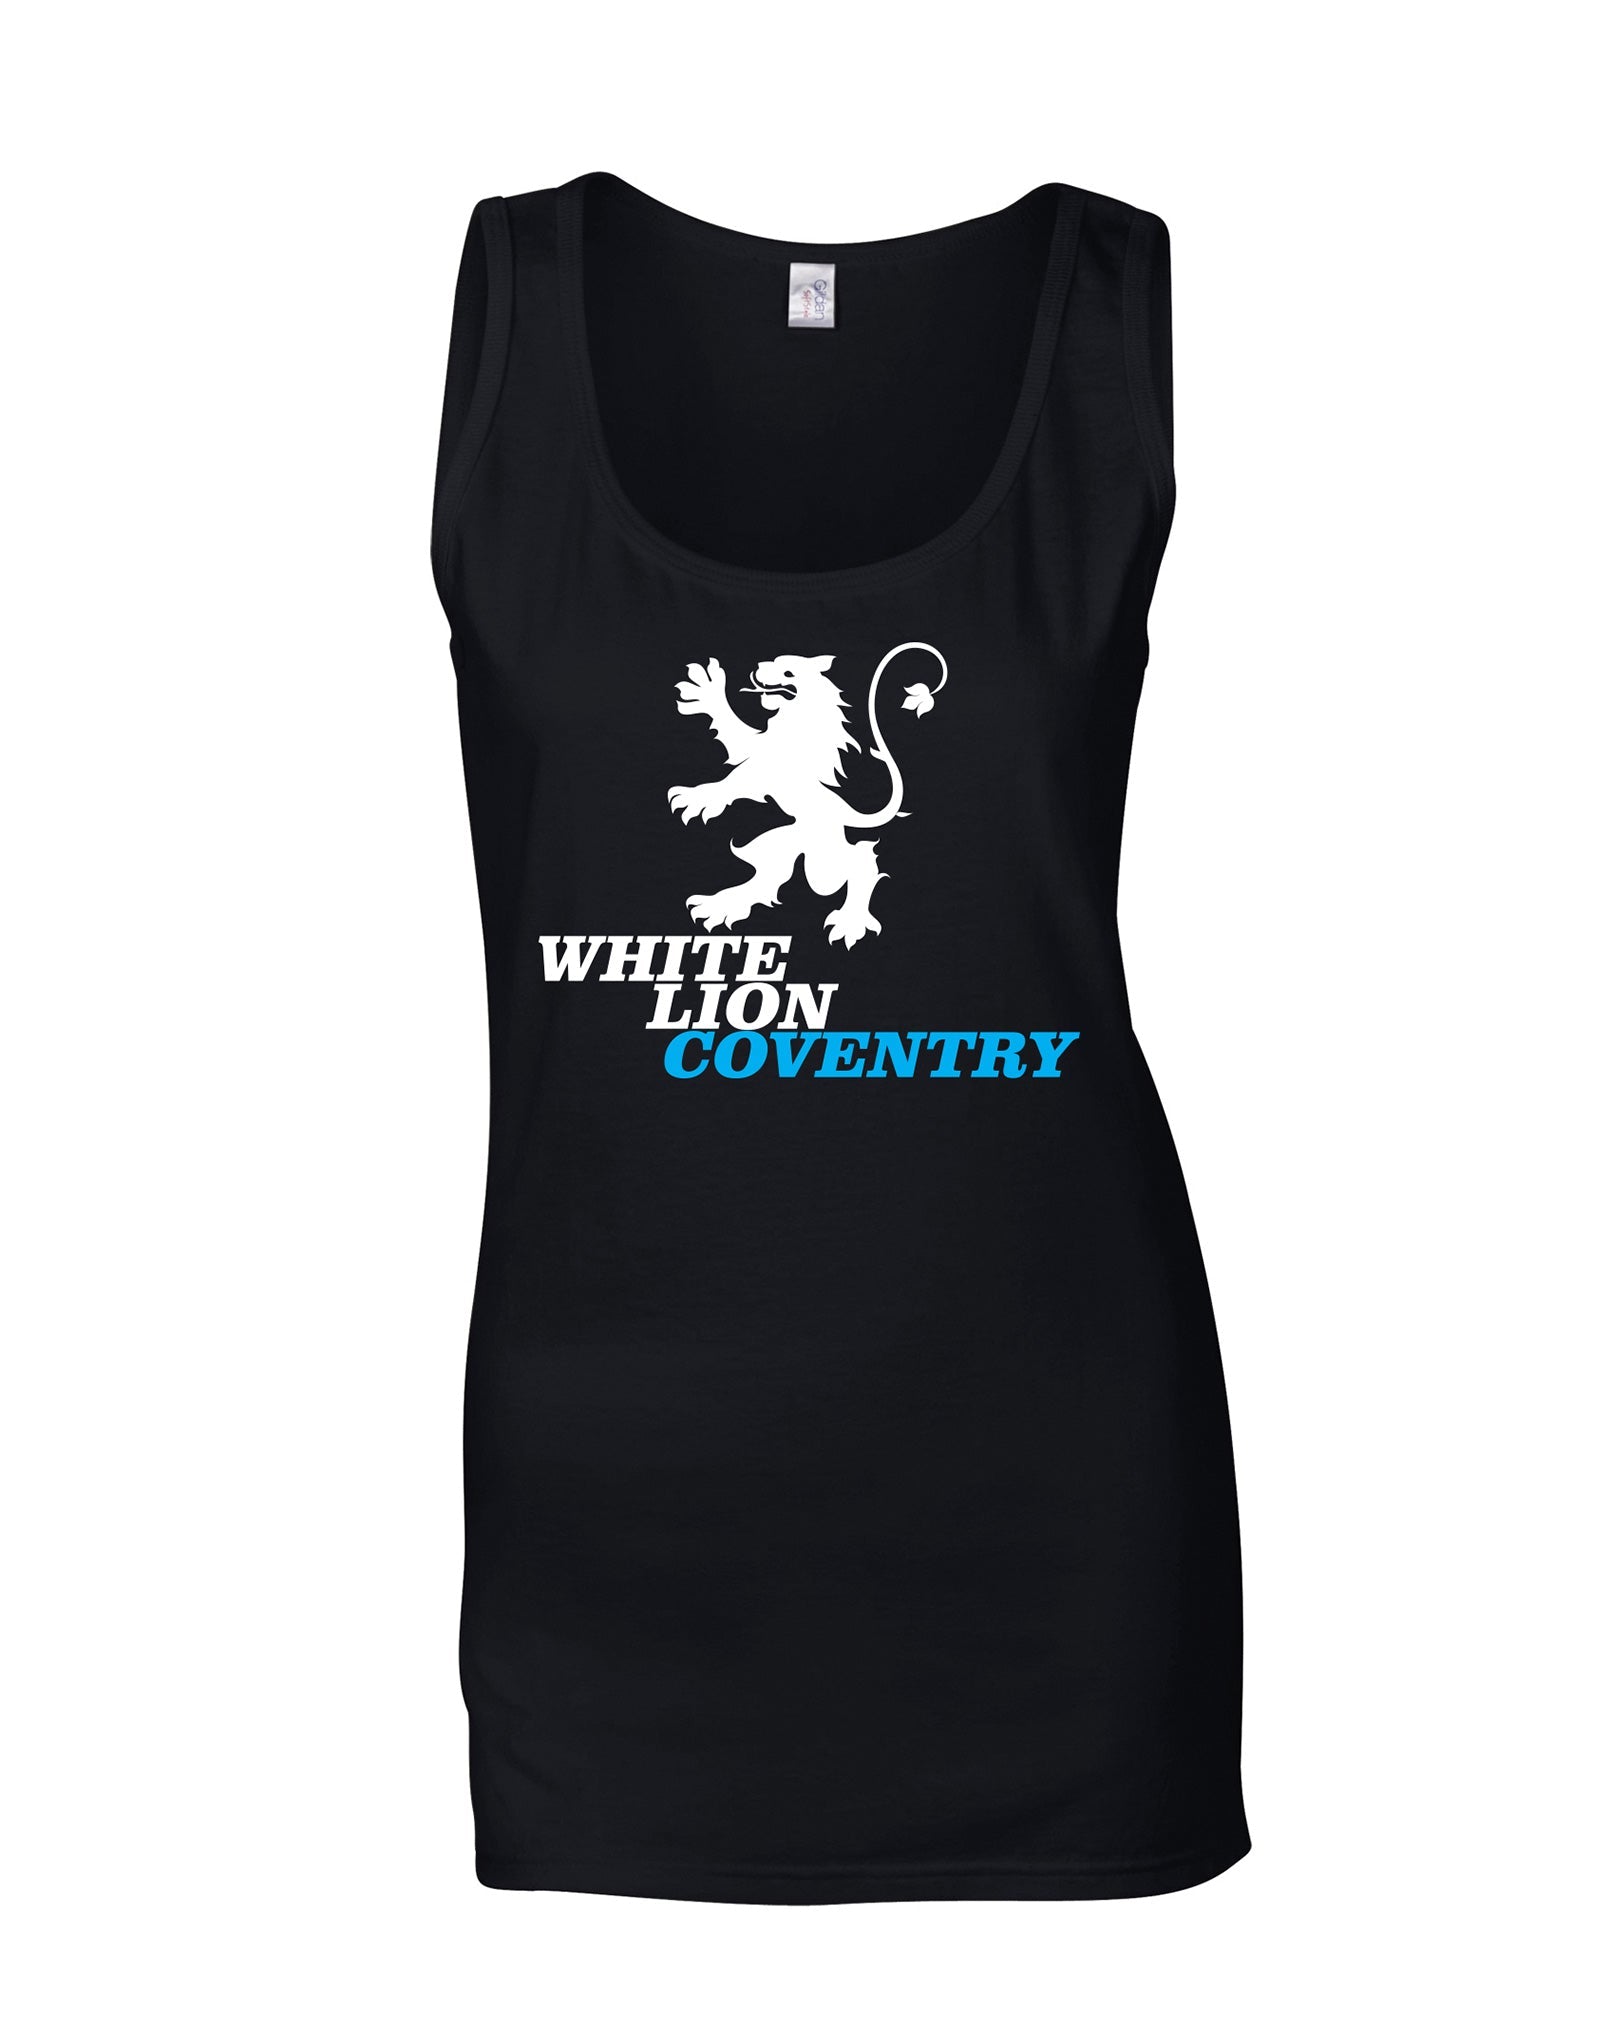 White Lion Coventry ladies fit vest - various colours - Dirty Stop Outs